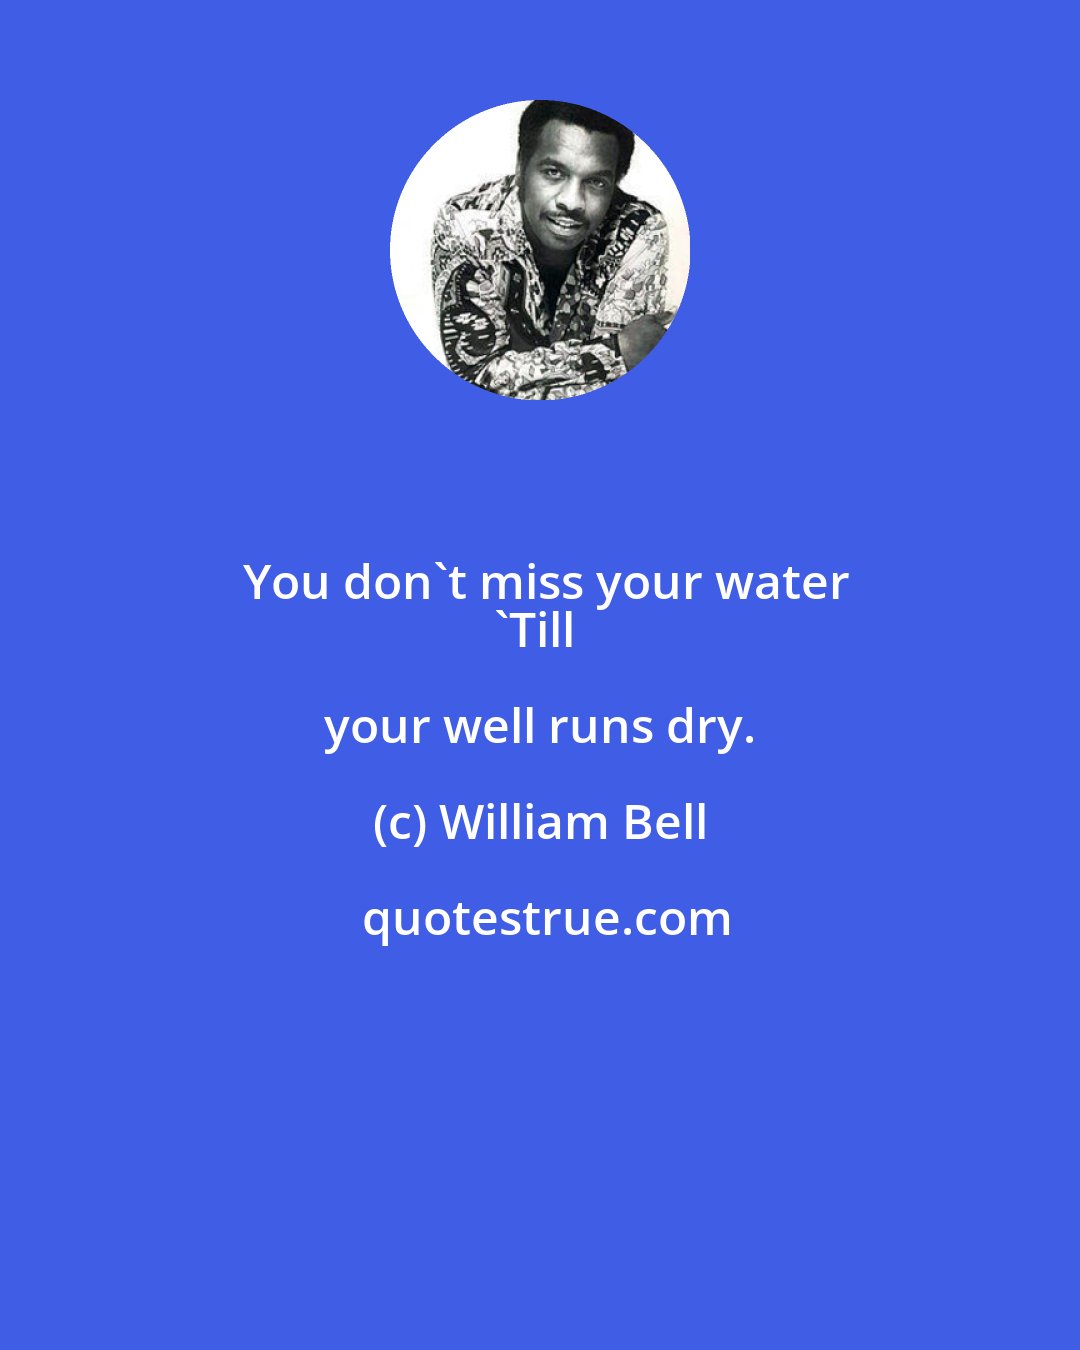 William Bell: You don't miss your water
'Till your well runs dry.